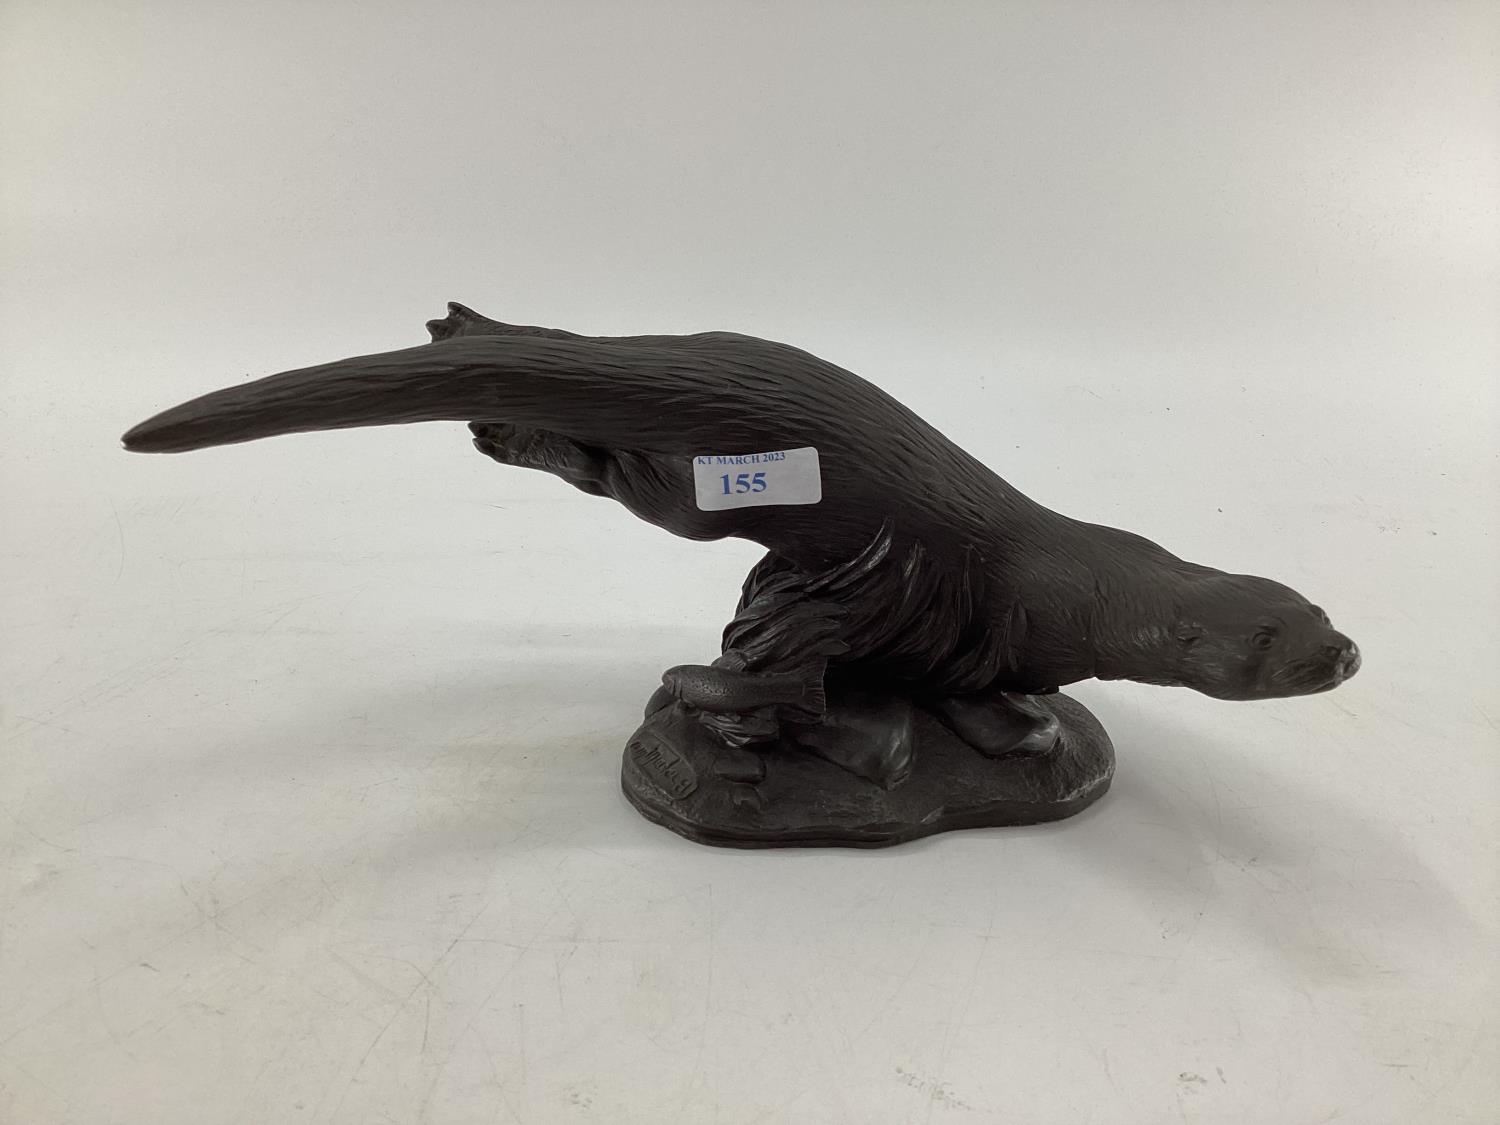 A resin model of an otter by Tim Mackie, on Naturalistic base, 30 x 16cm - Image 2 of 5